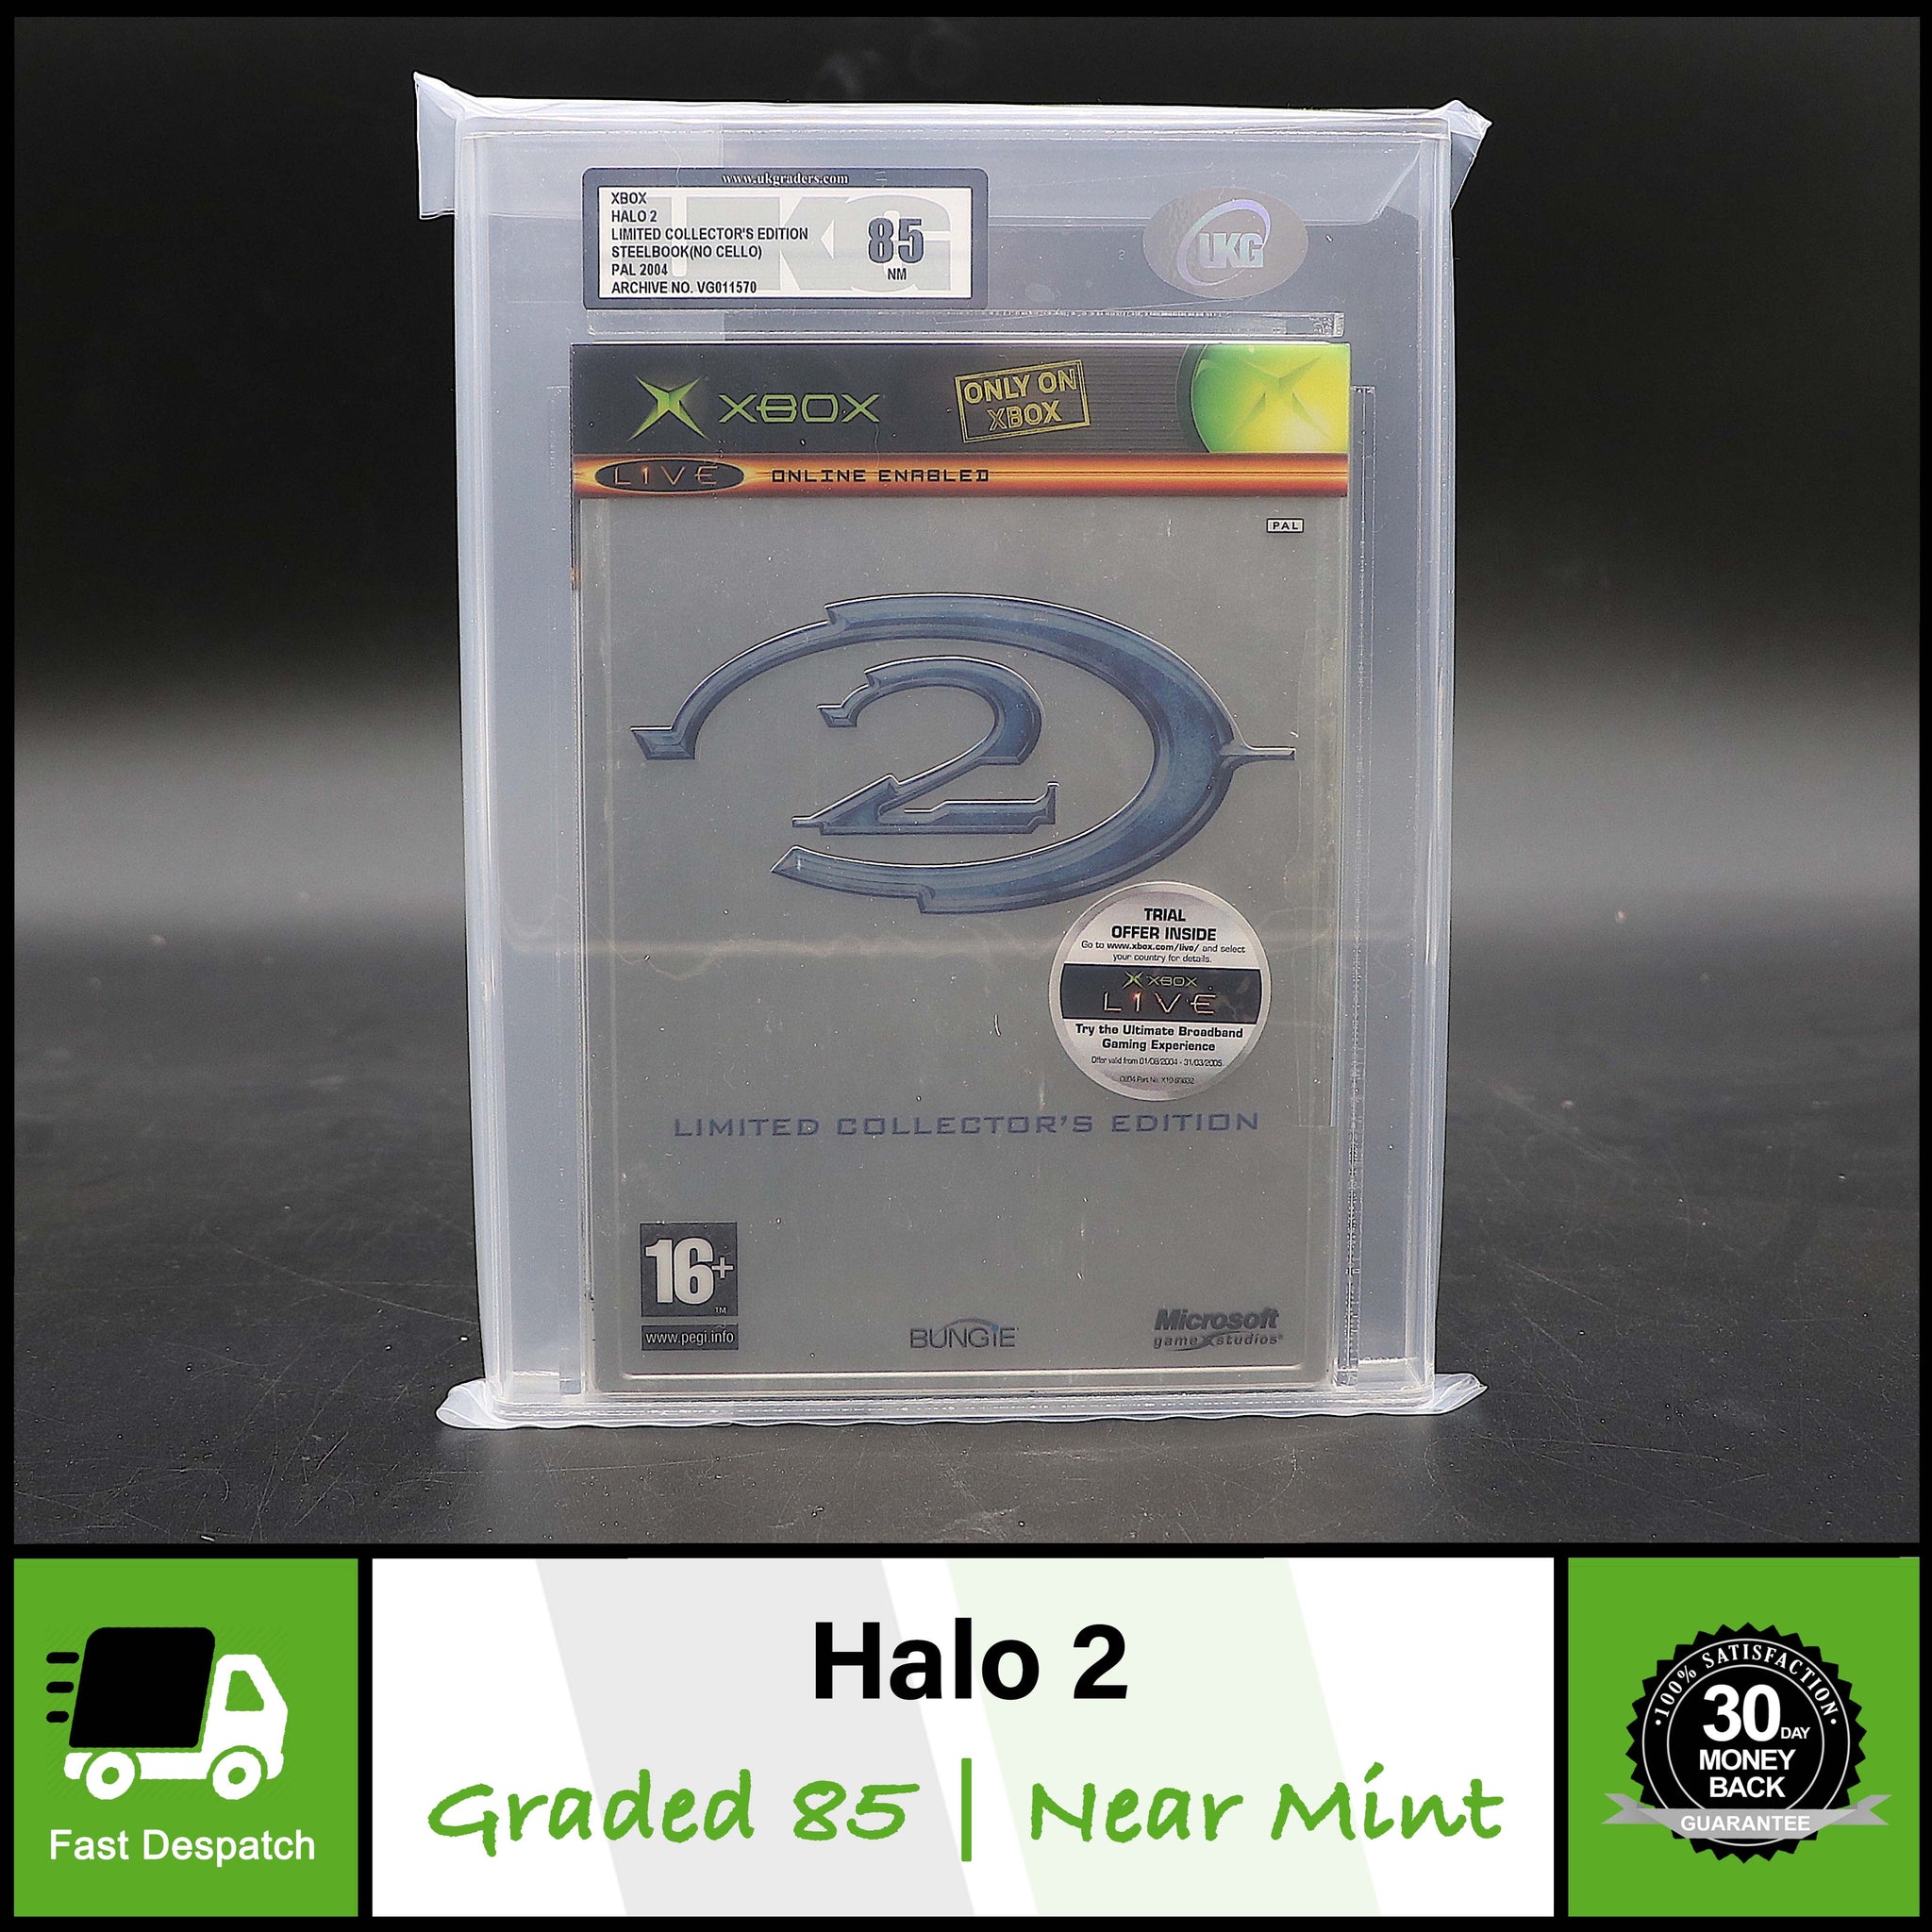 Halo 2 | Limited Collector's Edition Steelbook | Microsoft Xbox Game | UKG 85 NM